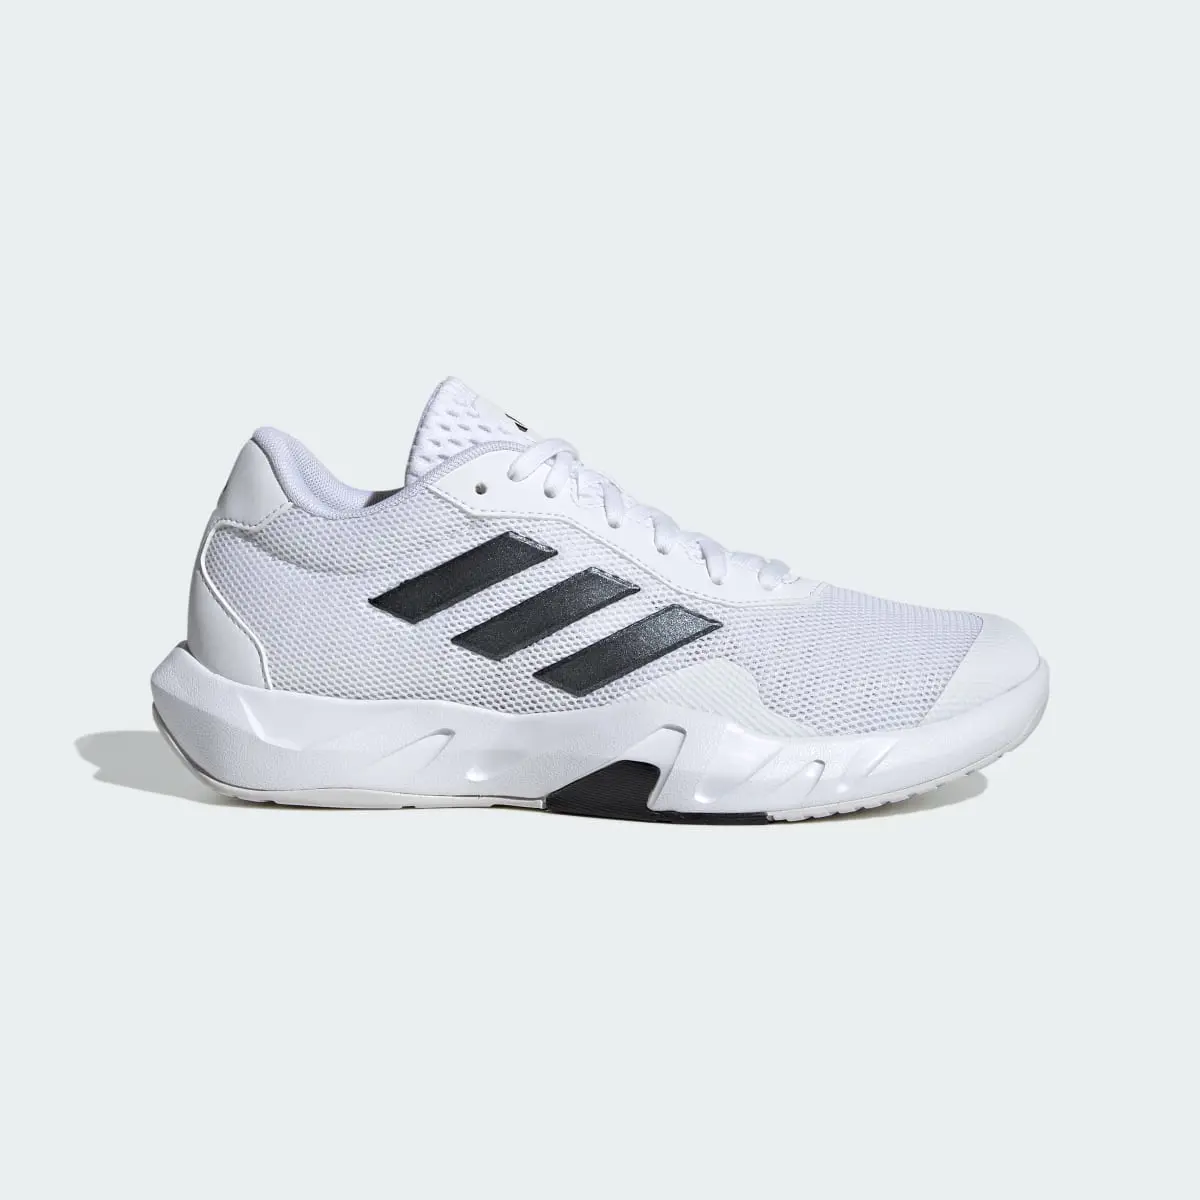 Adidas Amplimove Trainer Shoes. 2